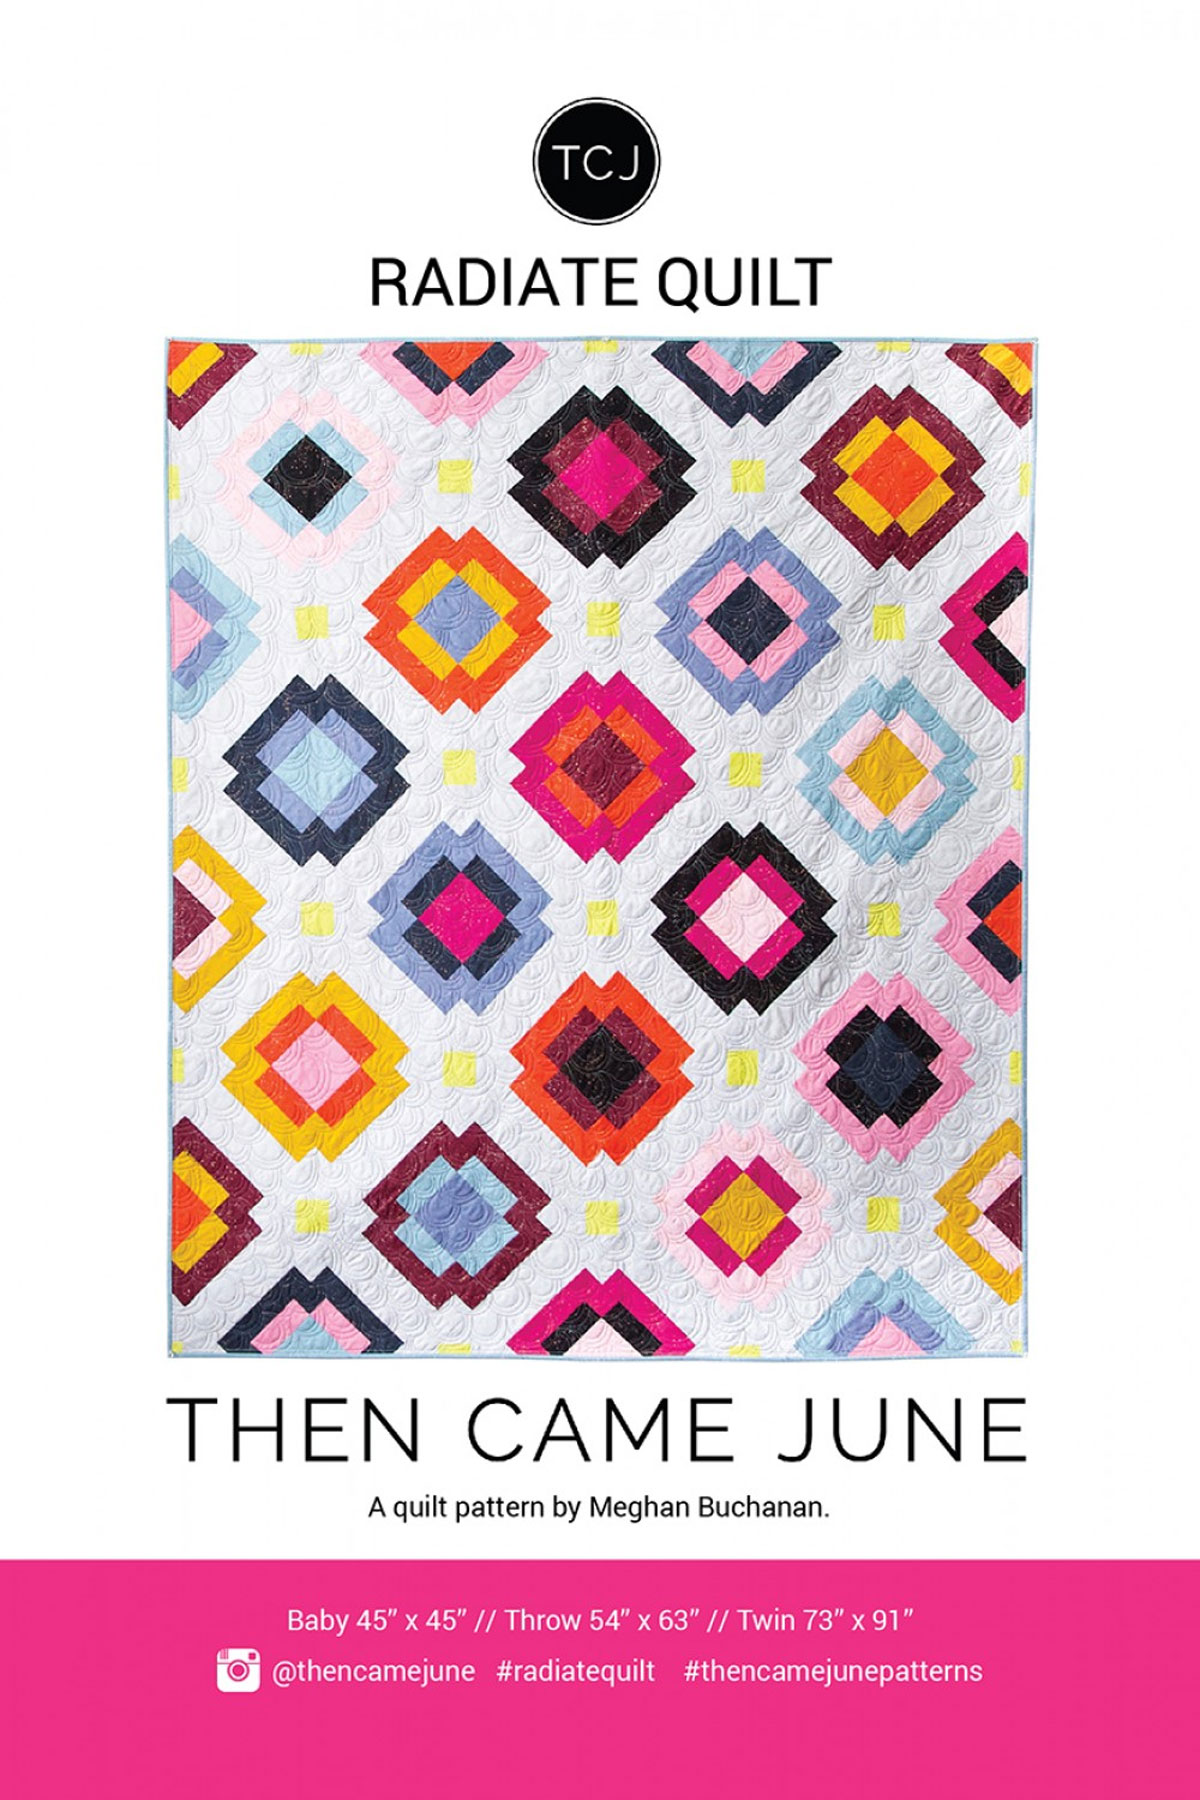 Radiate-quilt-sewing-pattern-Then-Came-June-Meghan-Buchanan-front